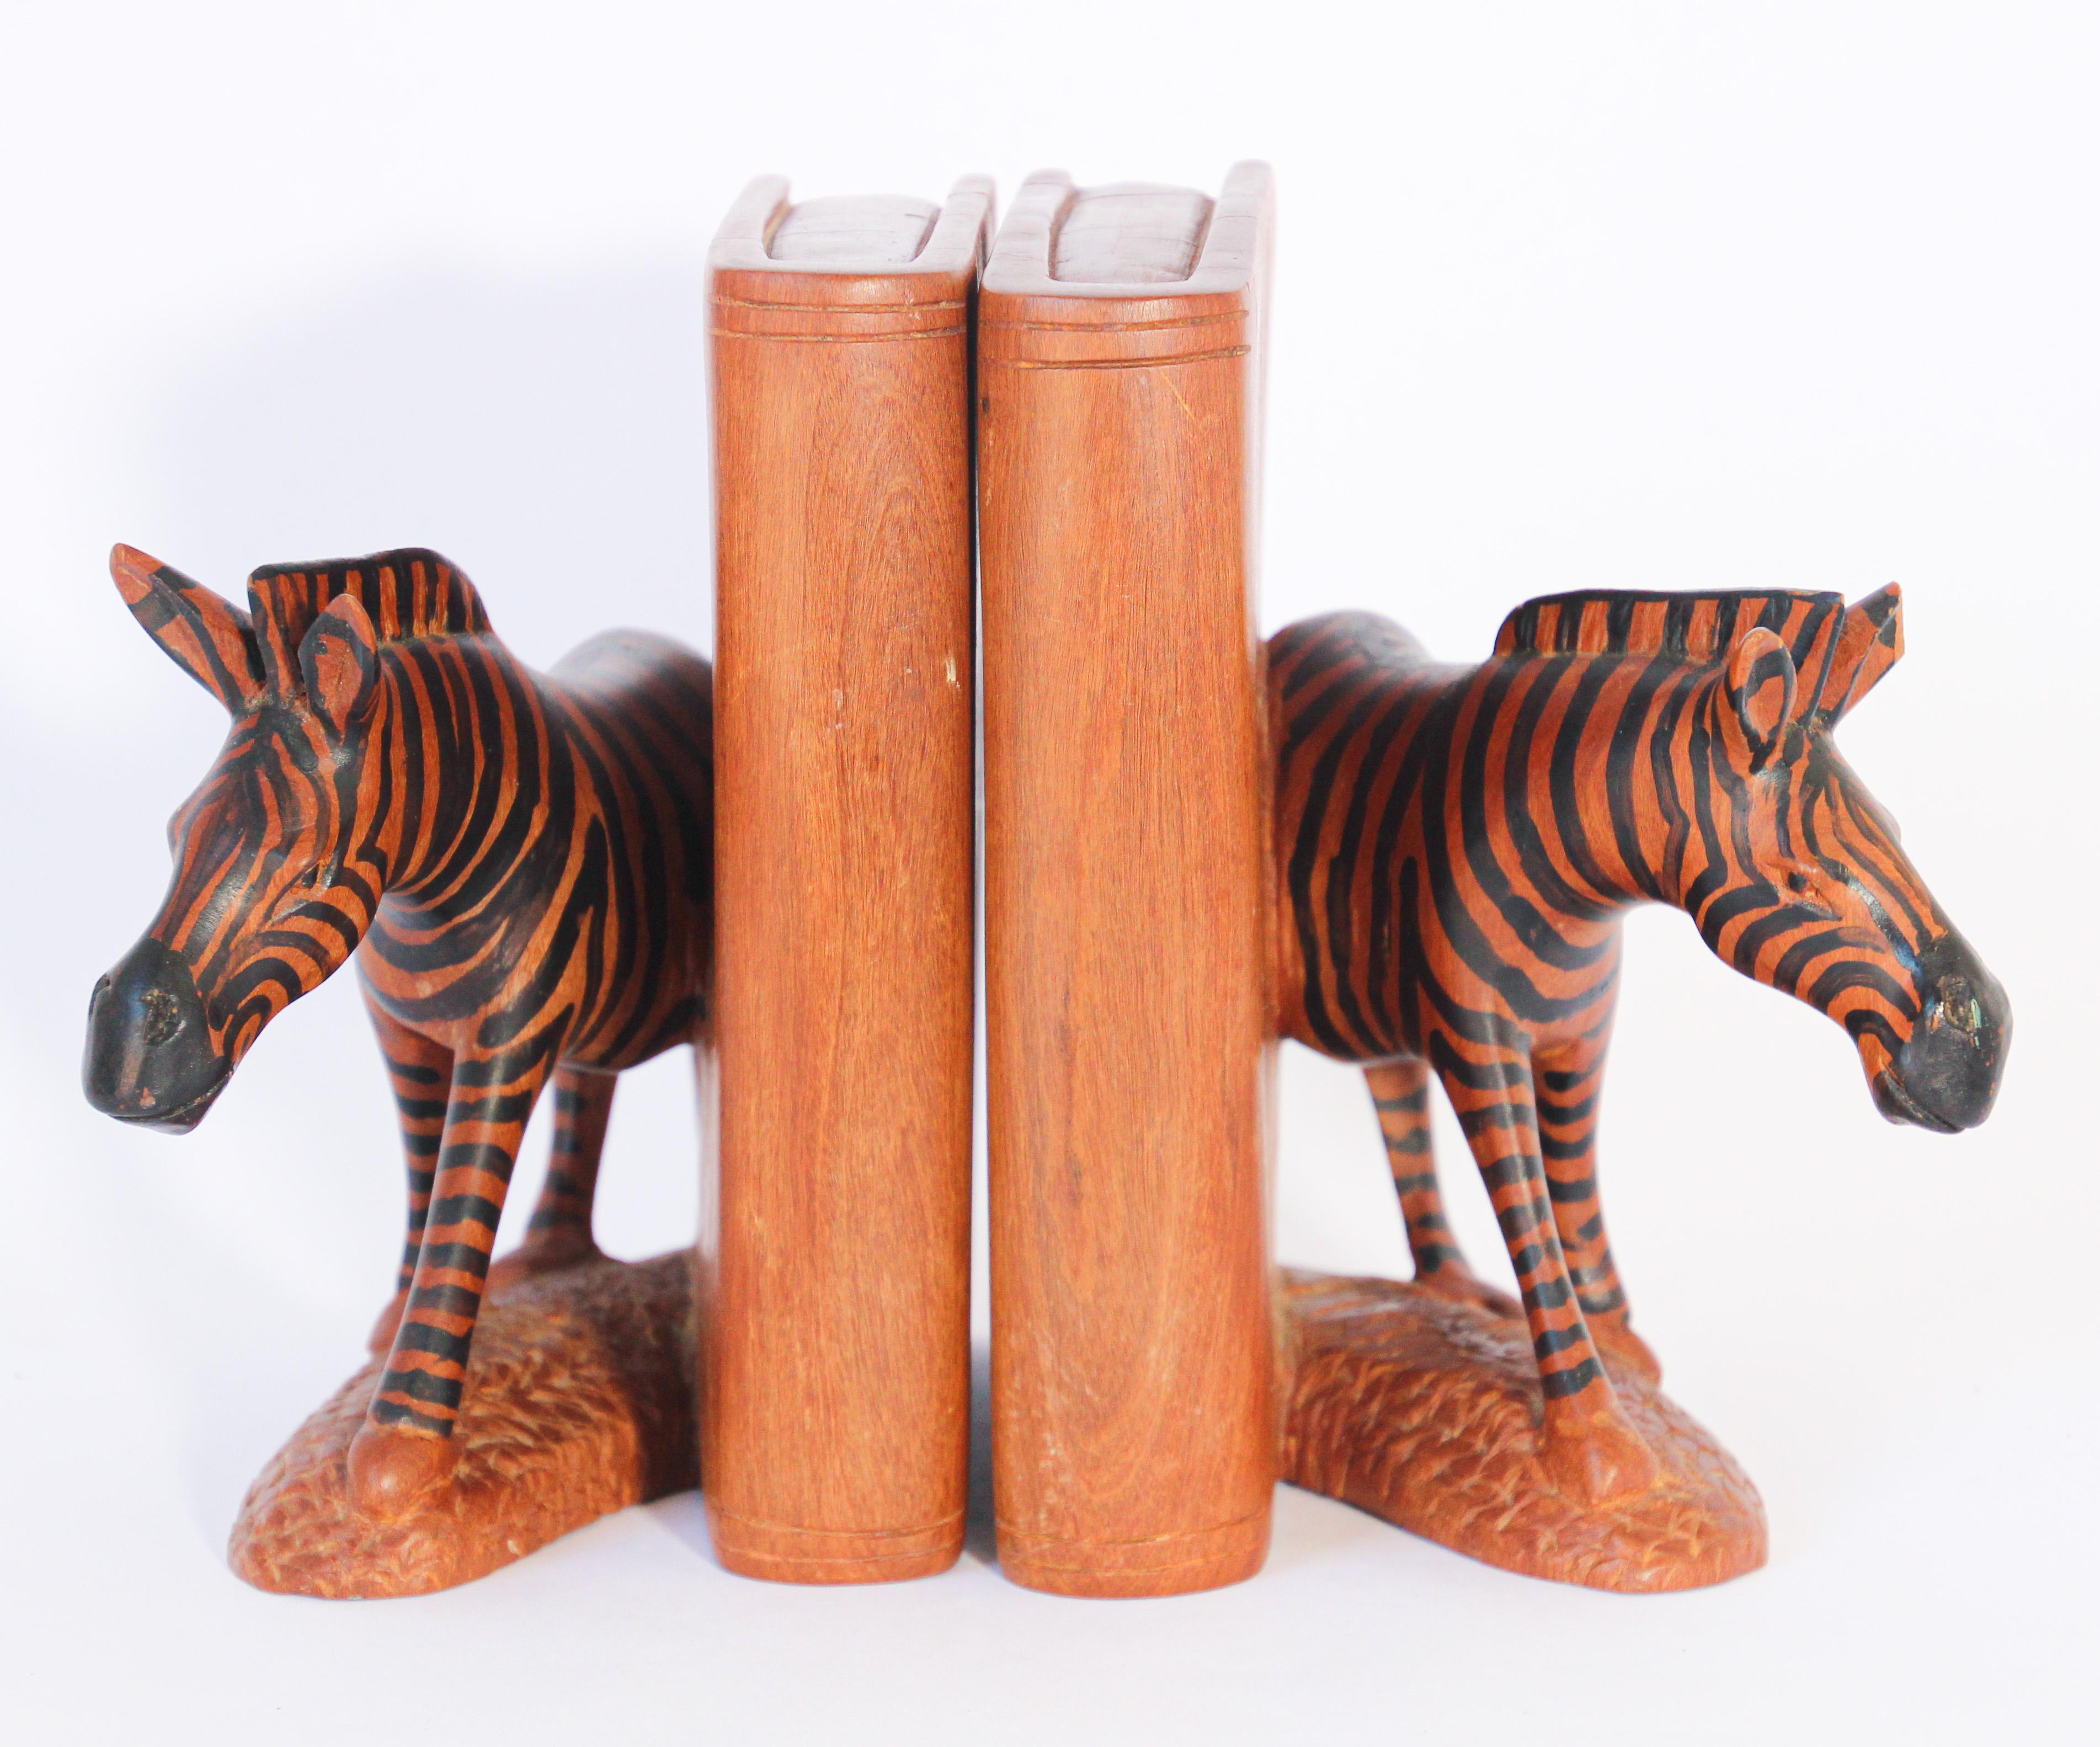 Nice pair of hand carved heavy wood bookends African Zebra sculptures.
This fine detailed hand carved and hand painted elephant bookends.
Each zebra sculpture with base and side is handcrafted from 1 piece of wood.
They are very well carved and